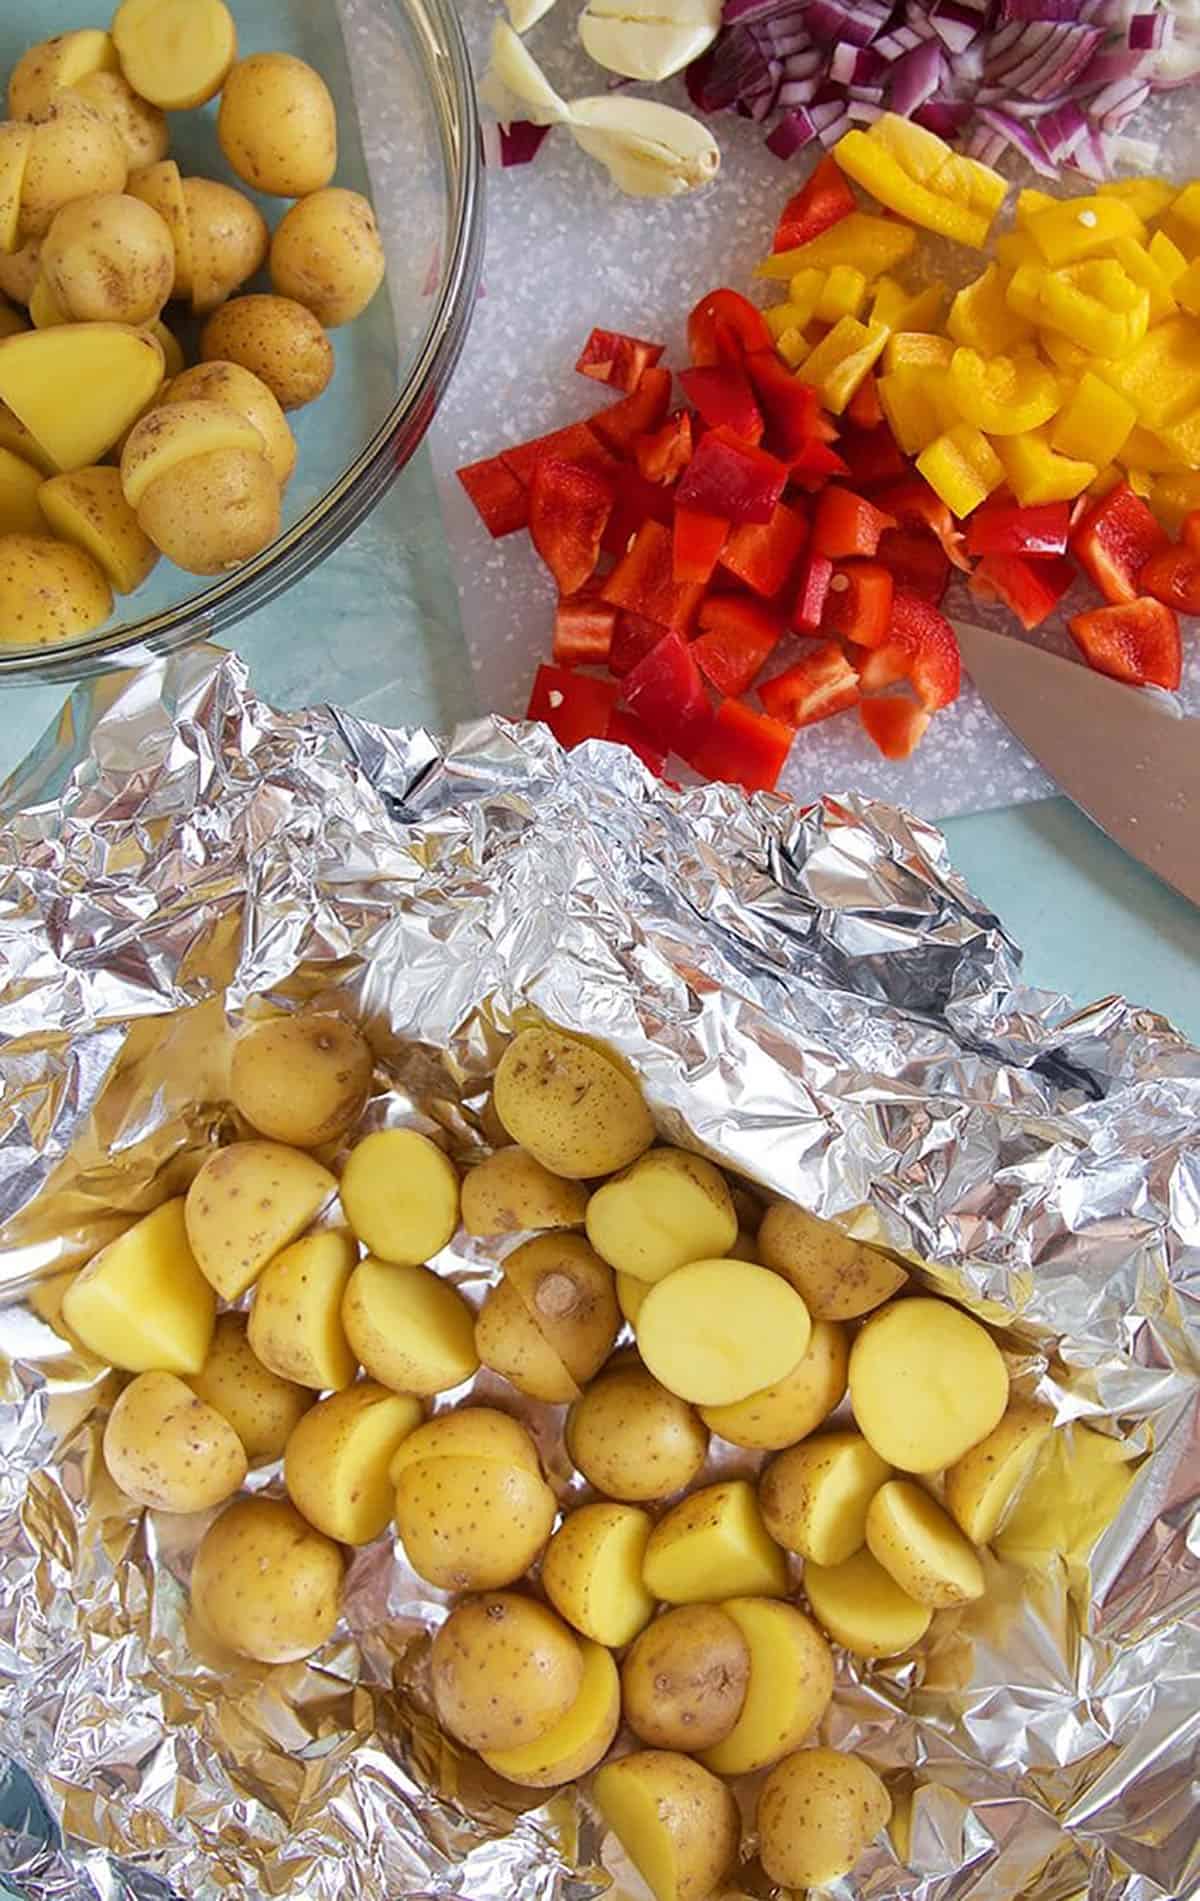 Potatoes in a foil packet with peppers and onions on the side getting ready to be tossed together.